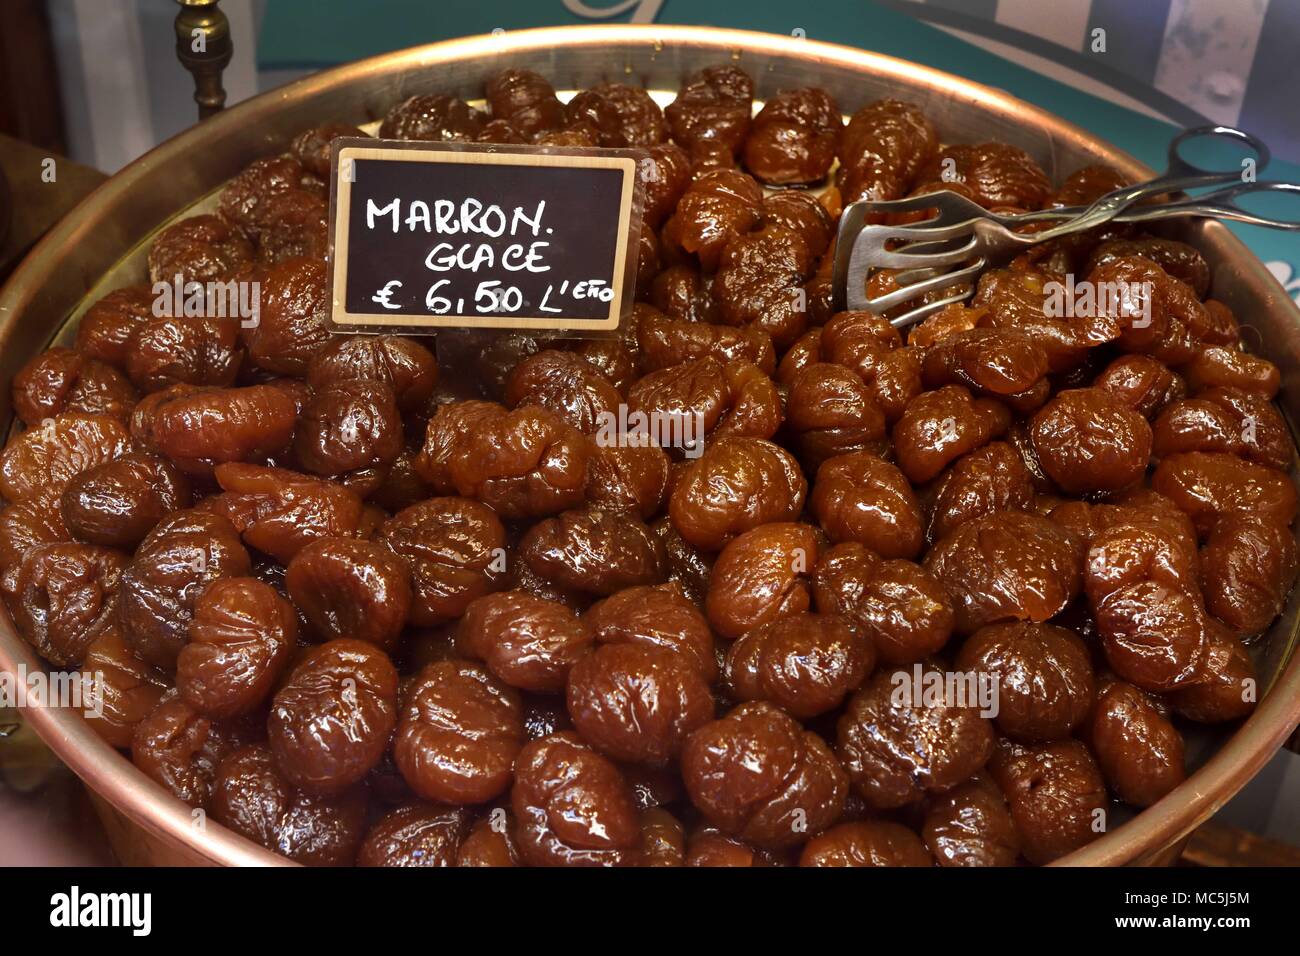 Marron Glacé Stock Photo, Picture and Royalty Free Image. Image 15991263.